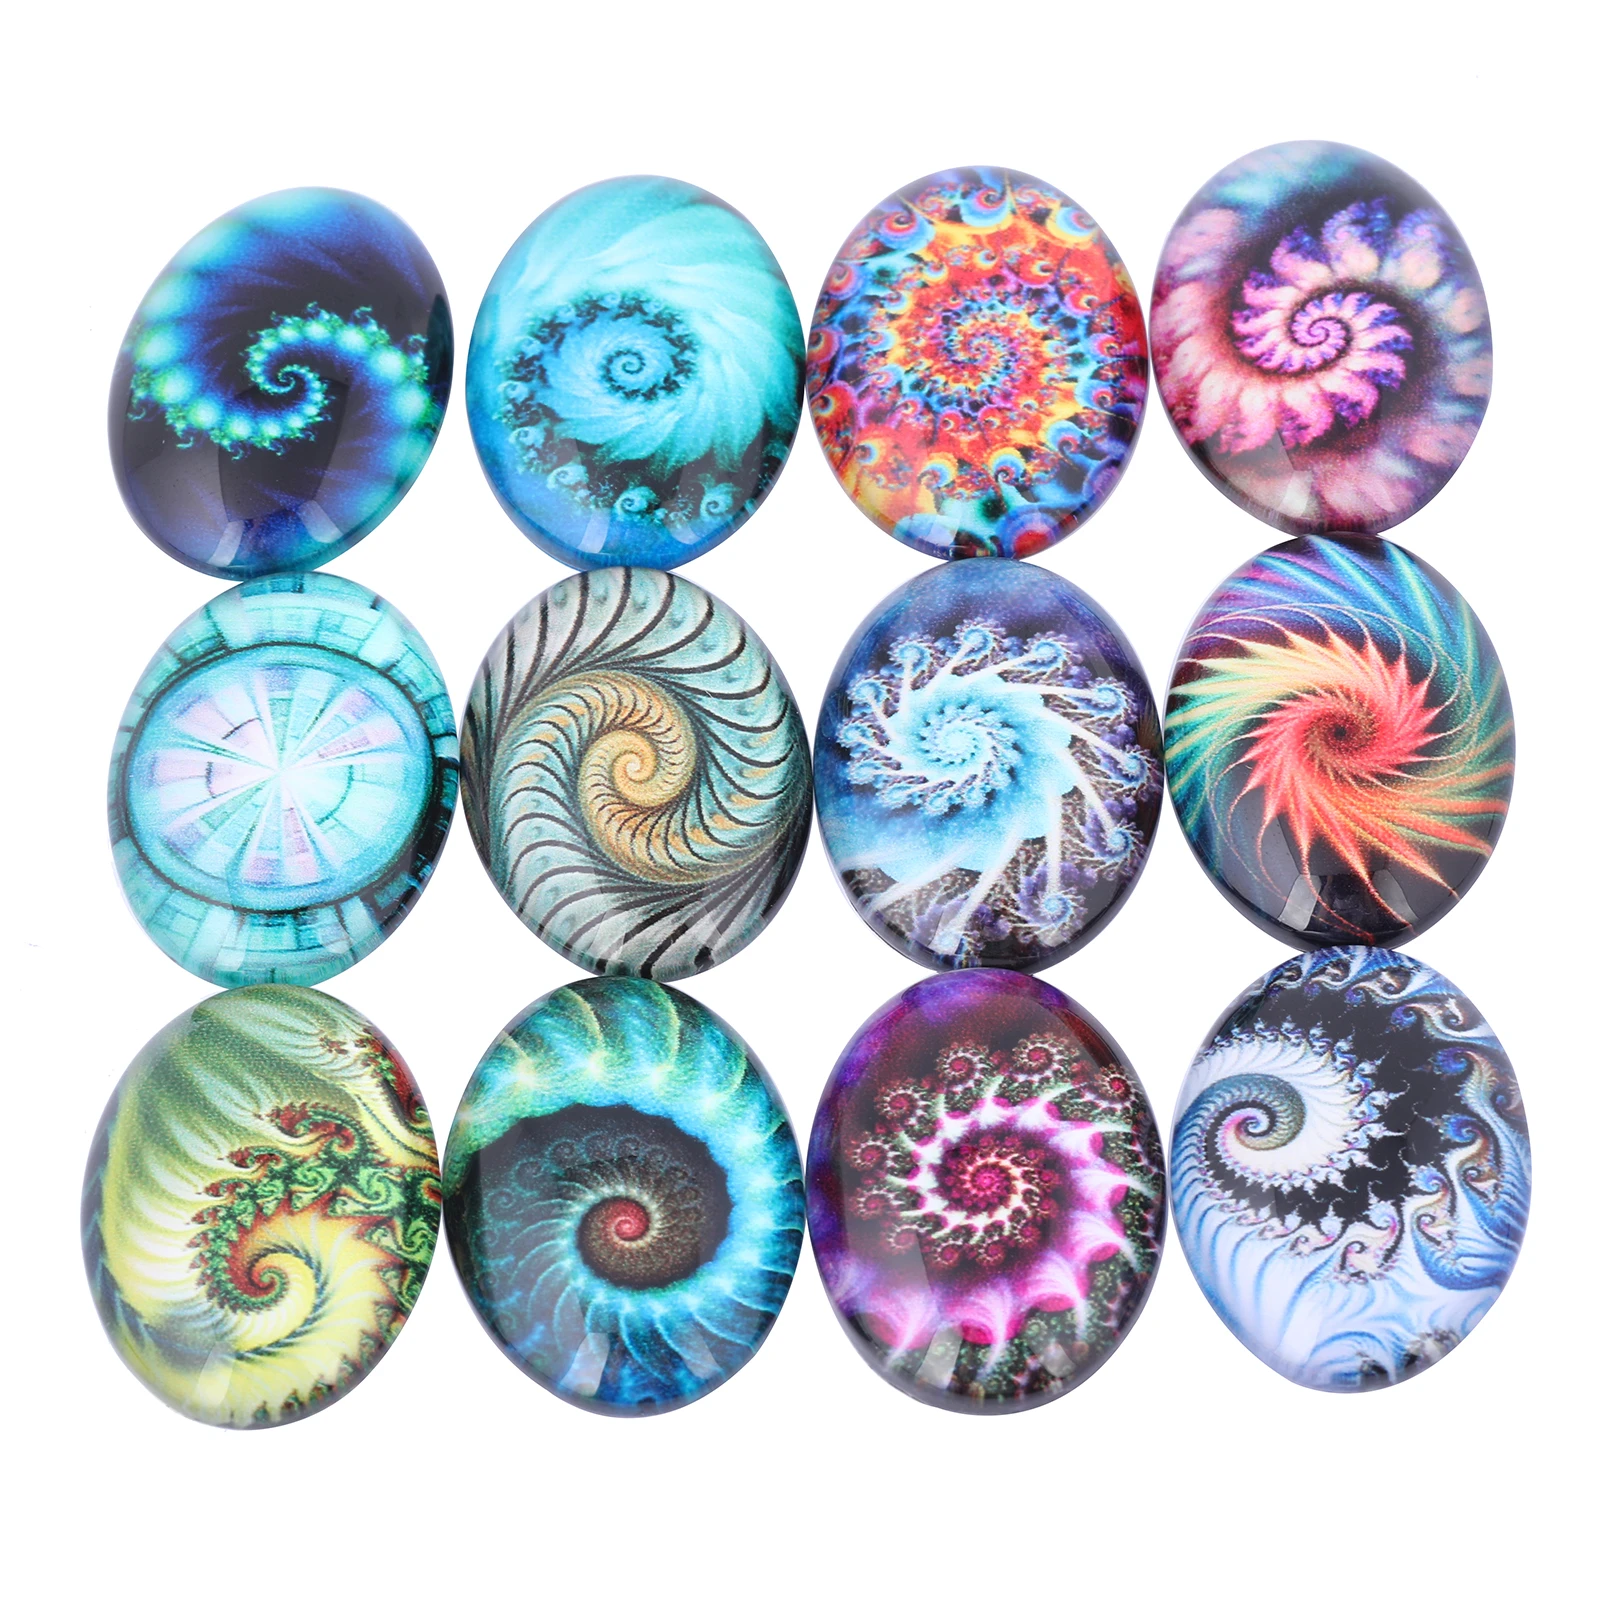 onwear 20pcs handmade mixed fractal photo oval glass cabochon 18x25mm 30x40mm diy flatback jewelry findings for pendant necklace